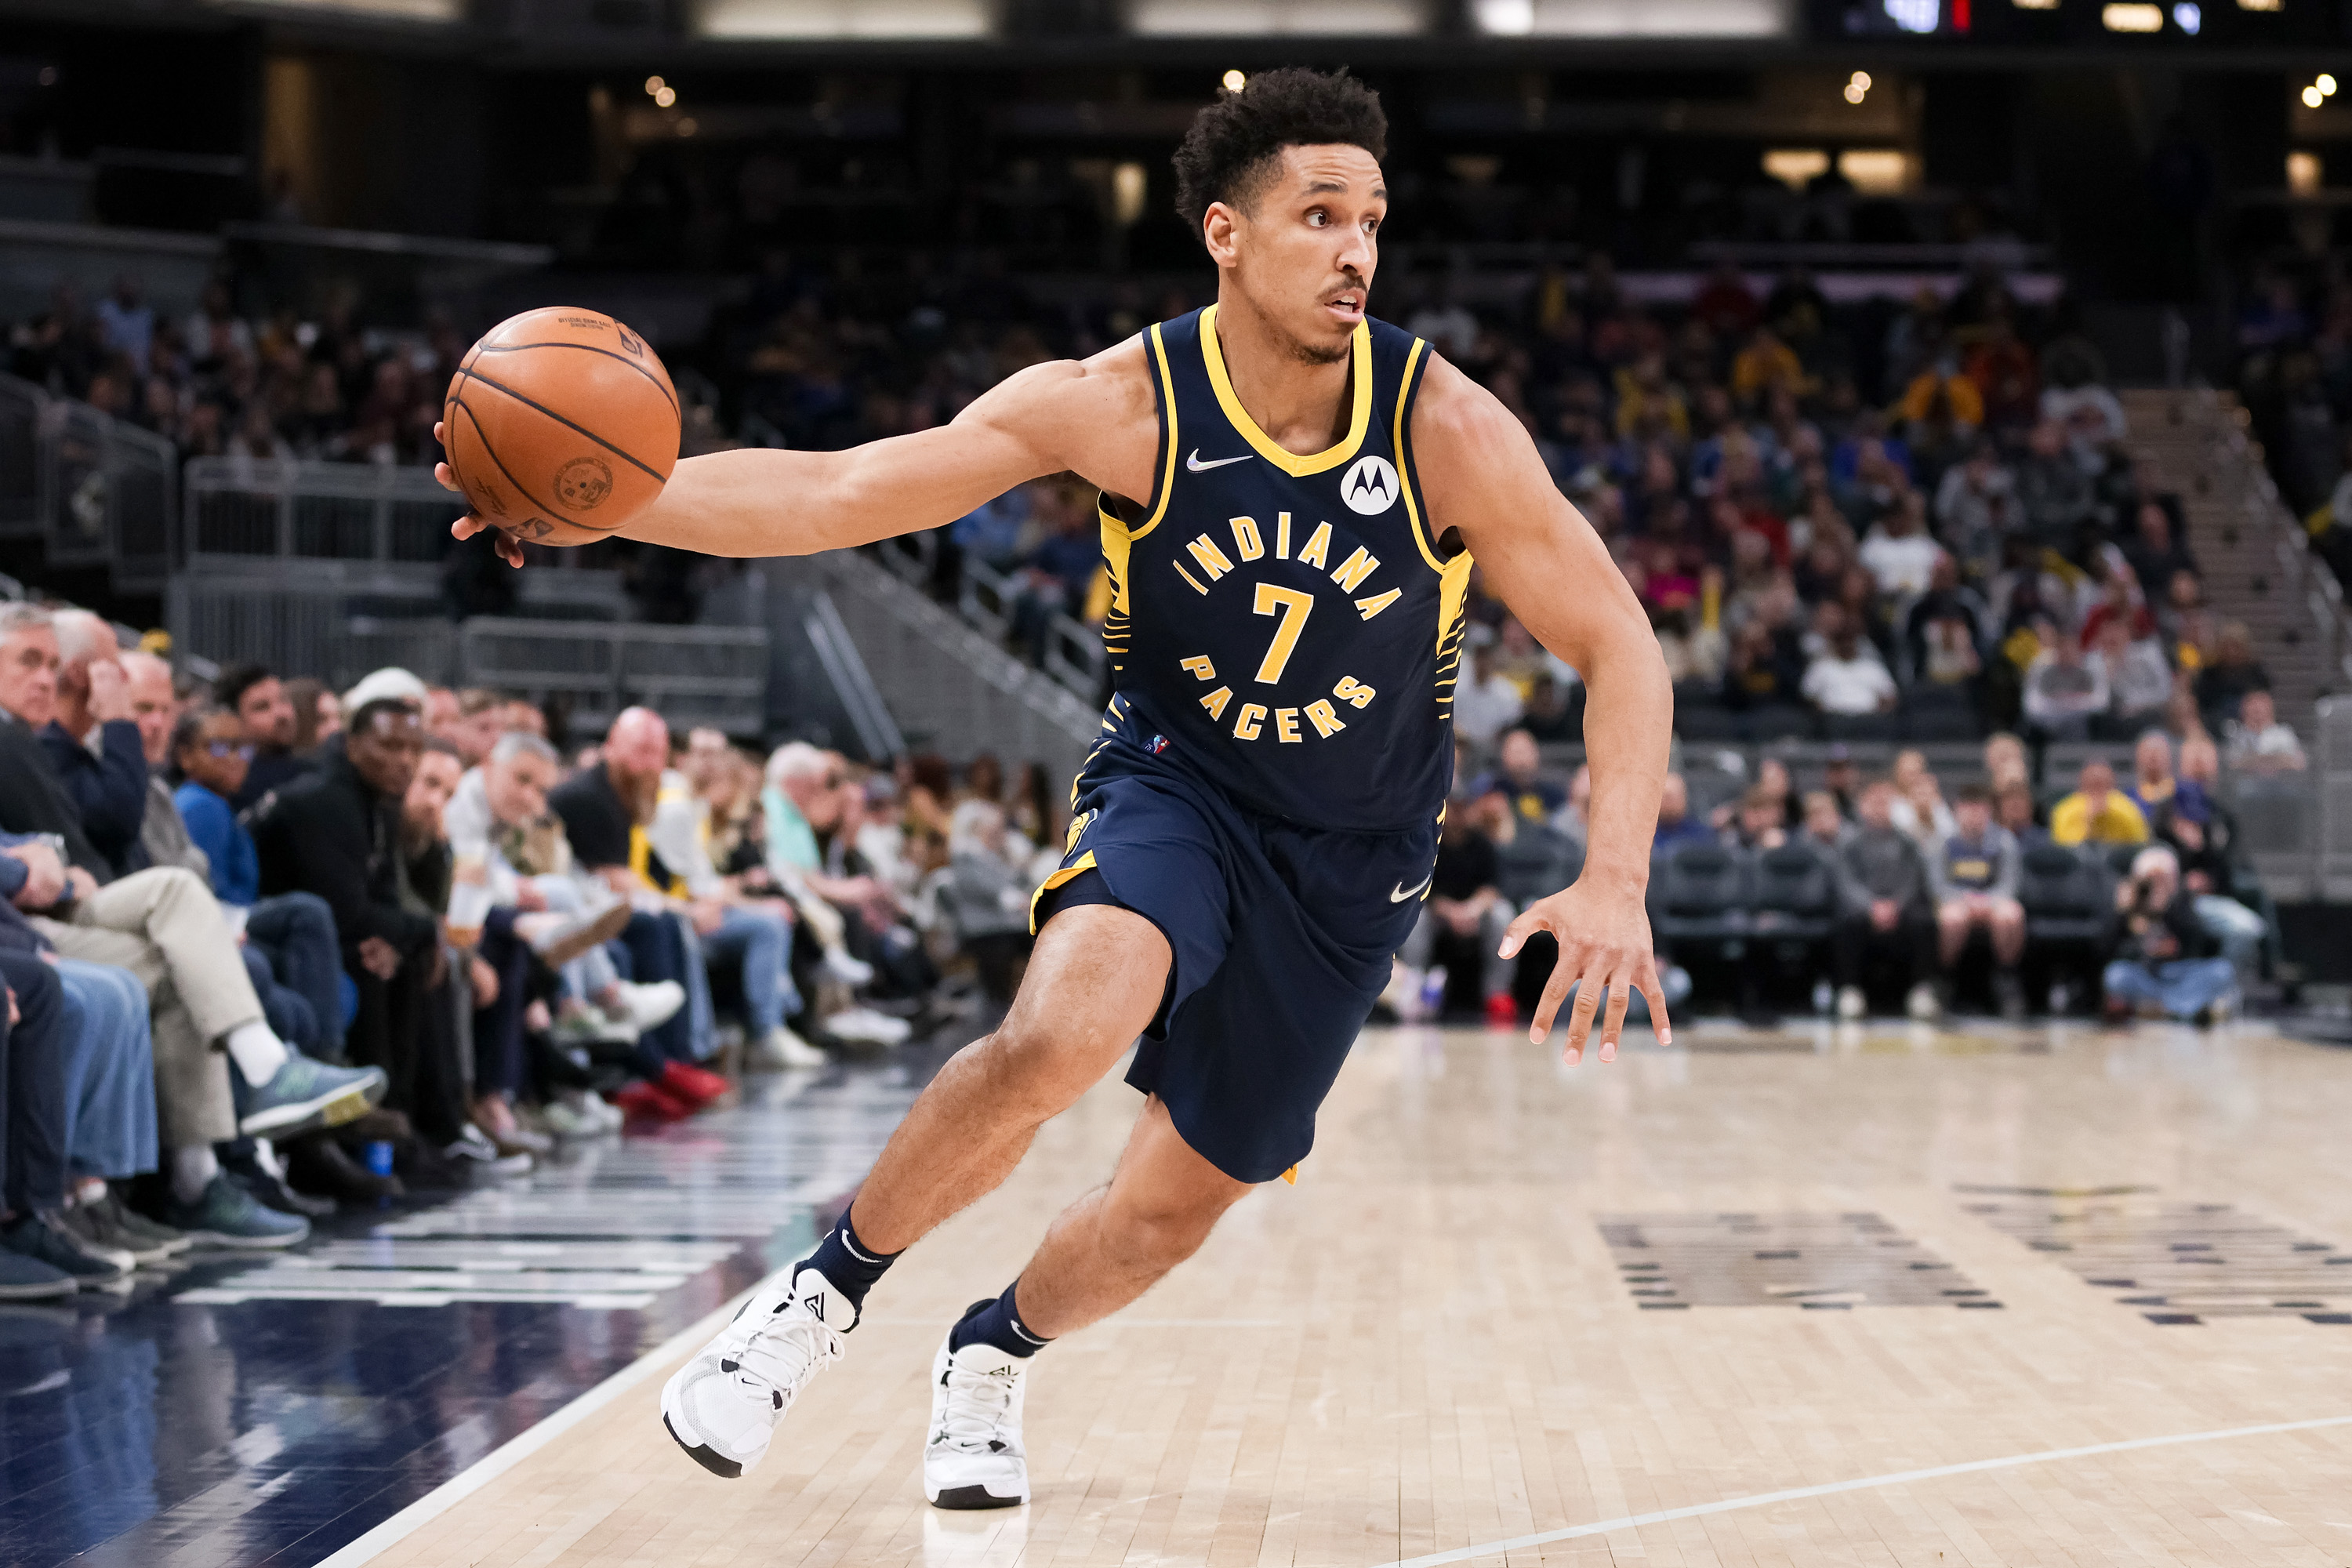 Malcolm Brogdon of the Indiana Pacers dribbles the ball.